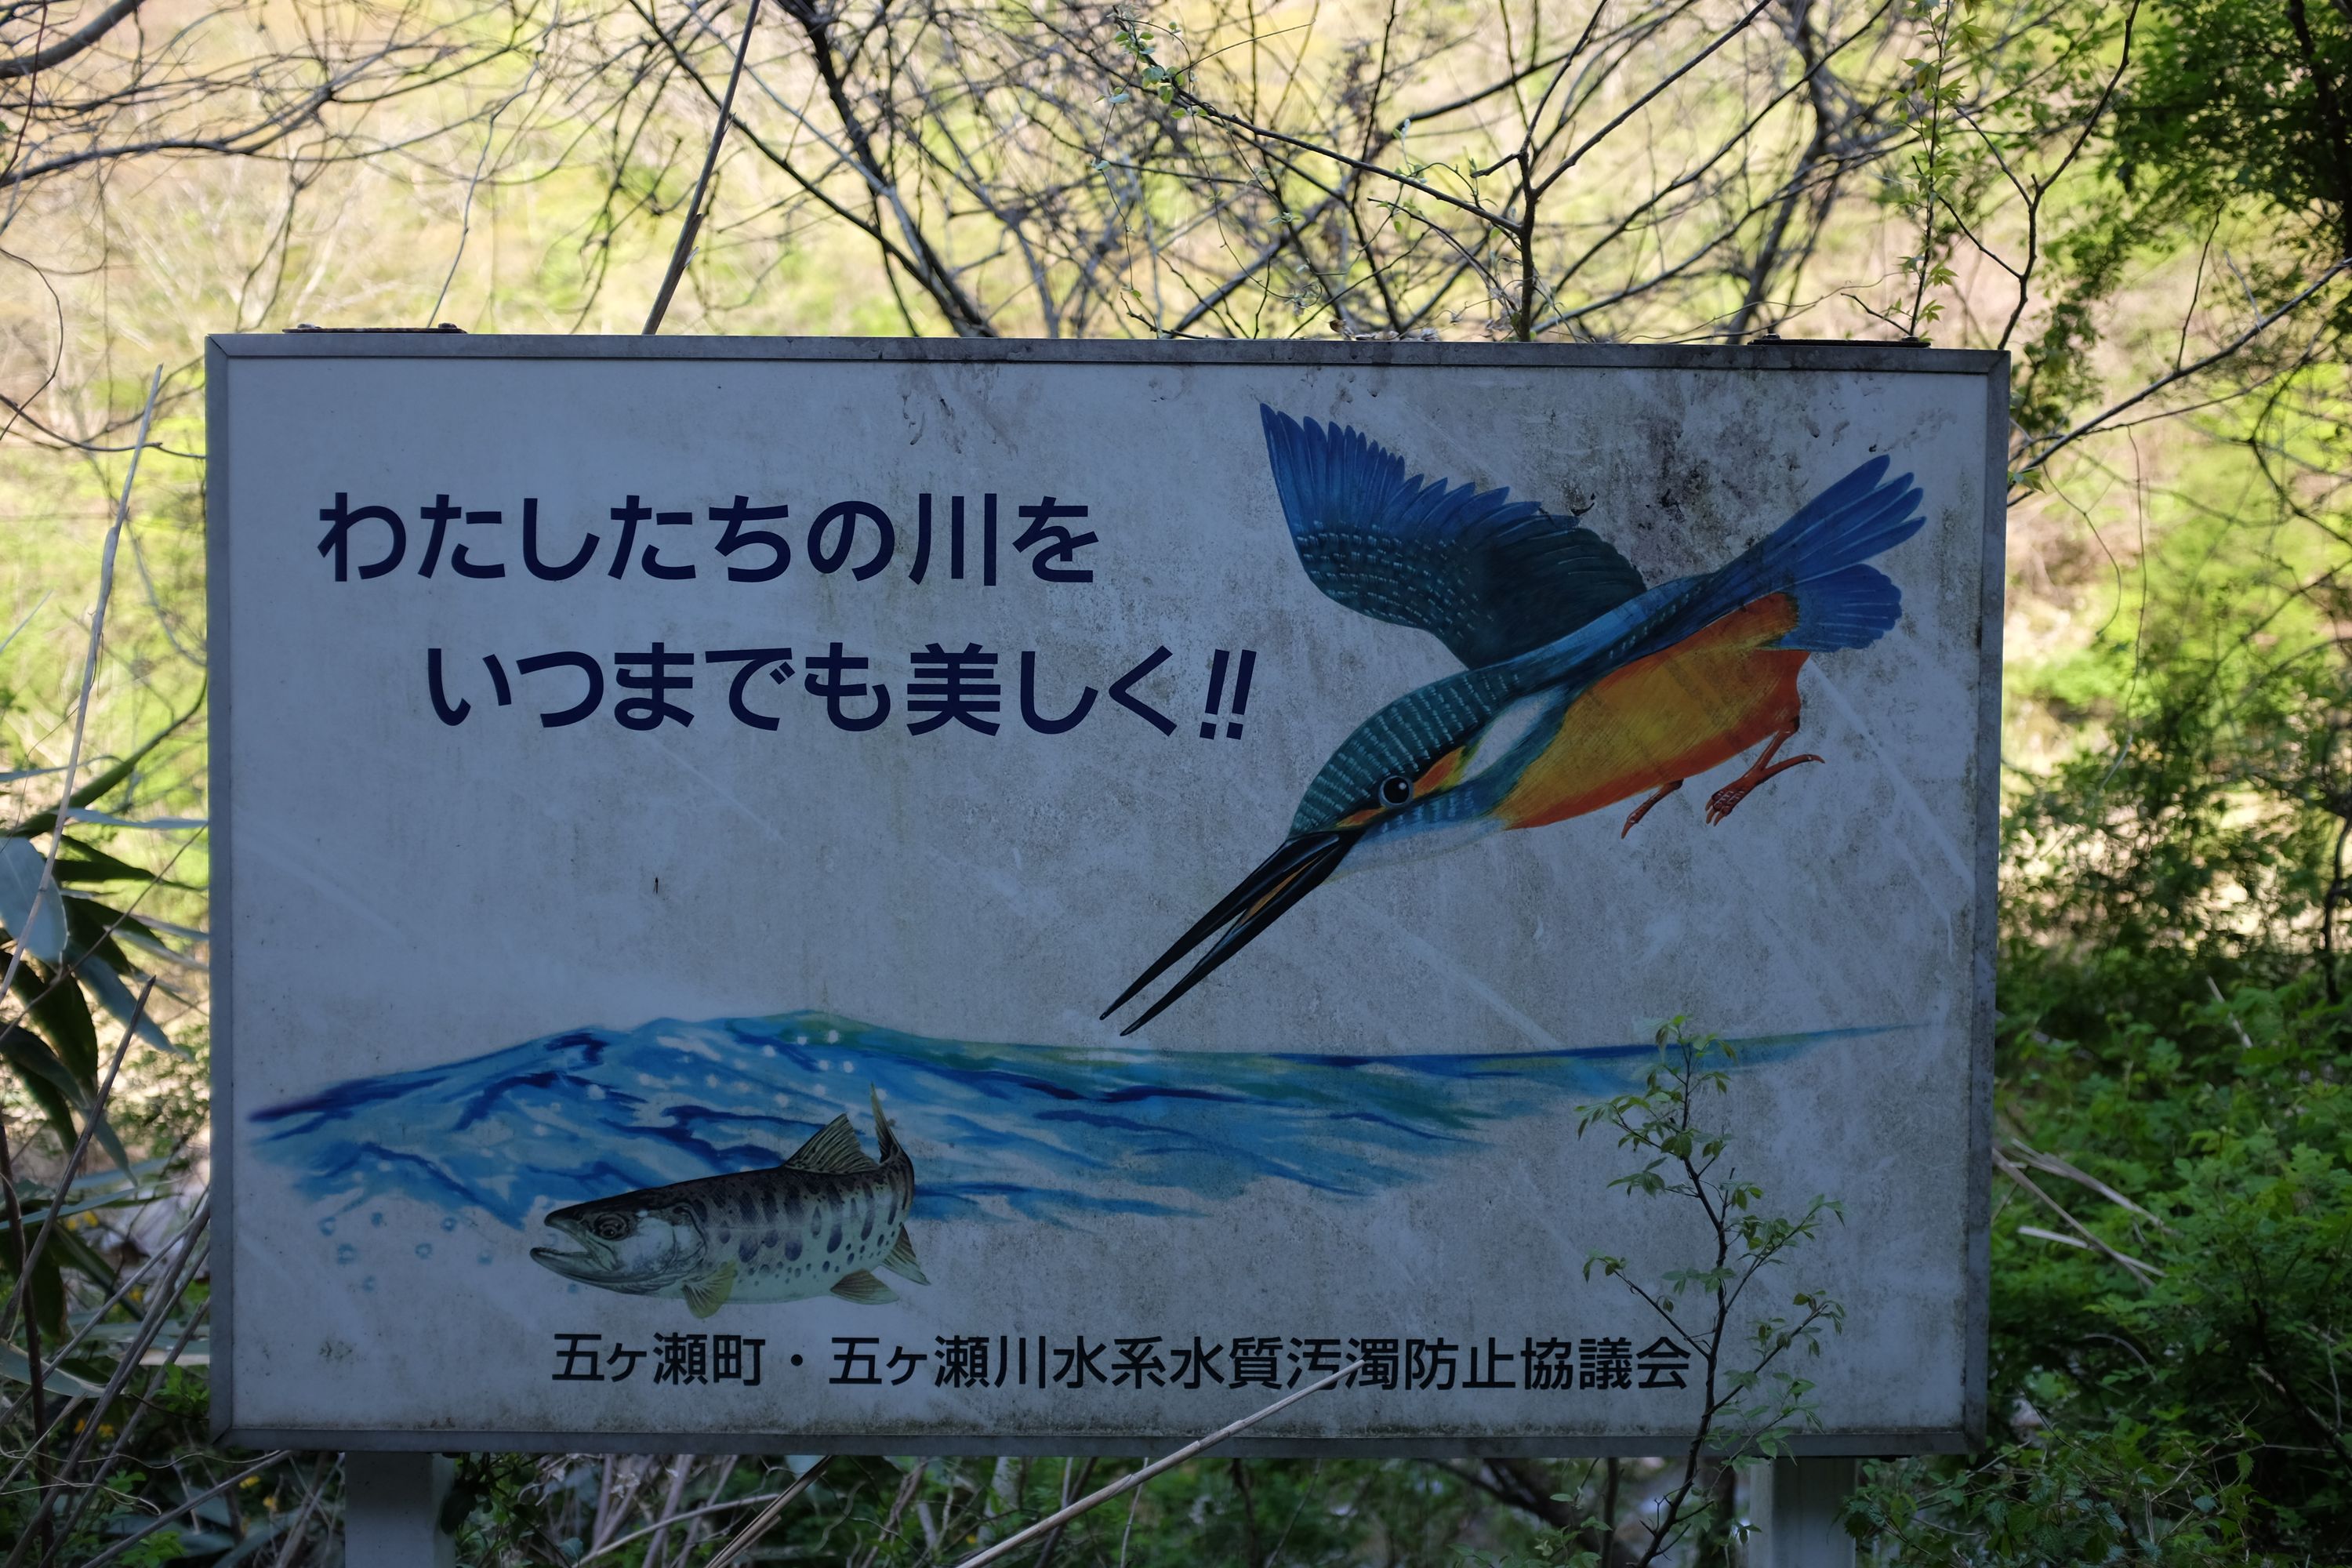 A sign shows a kingfisher diving for a trout.